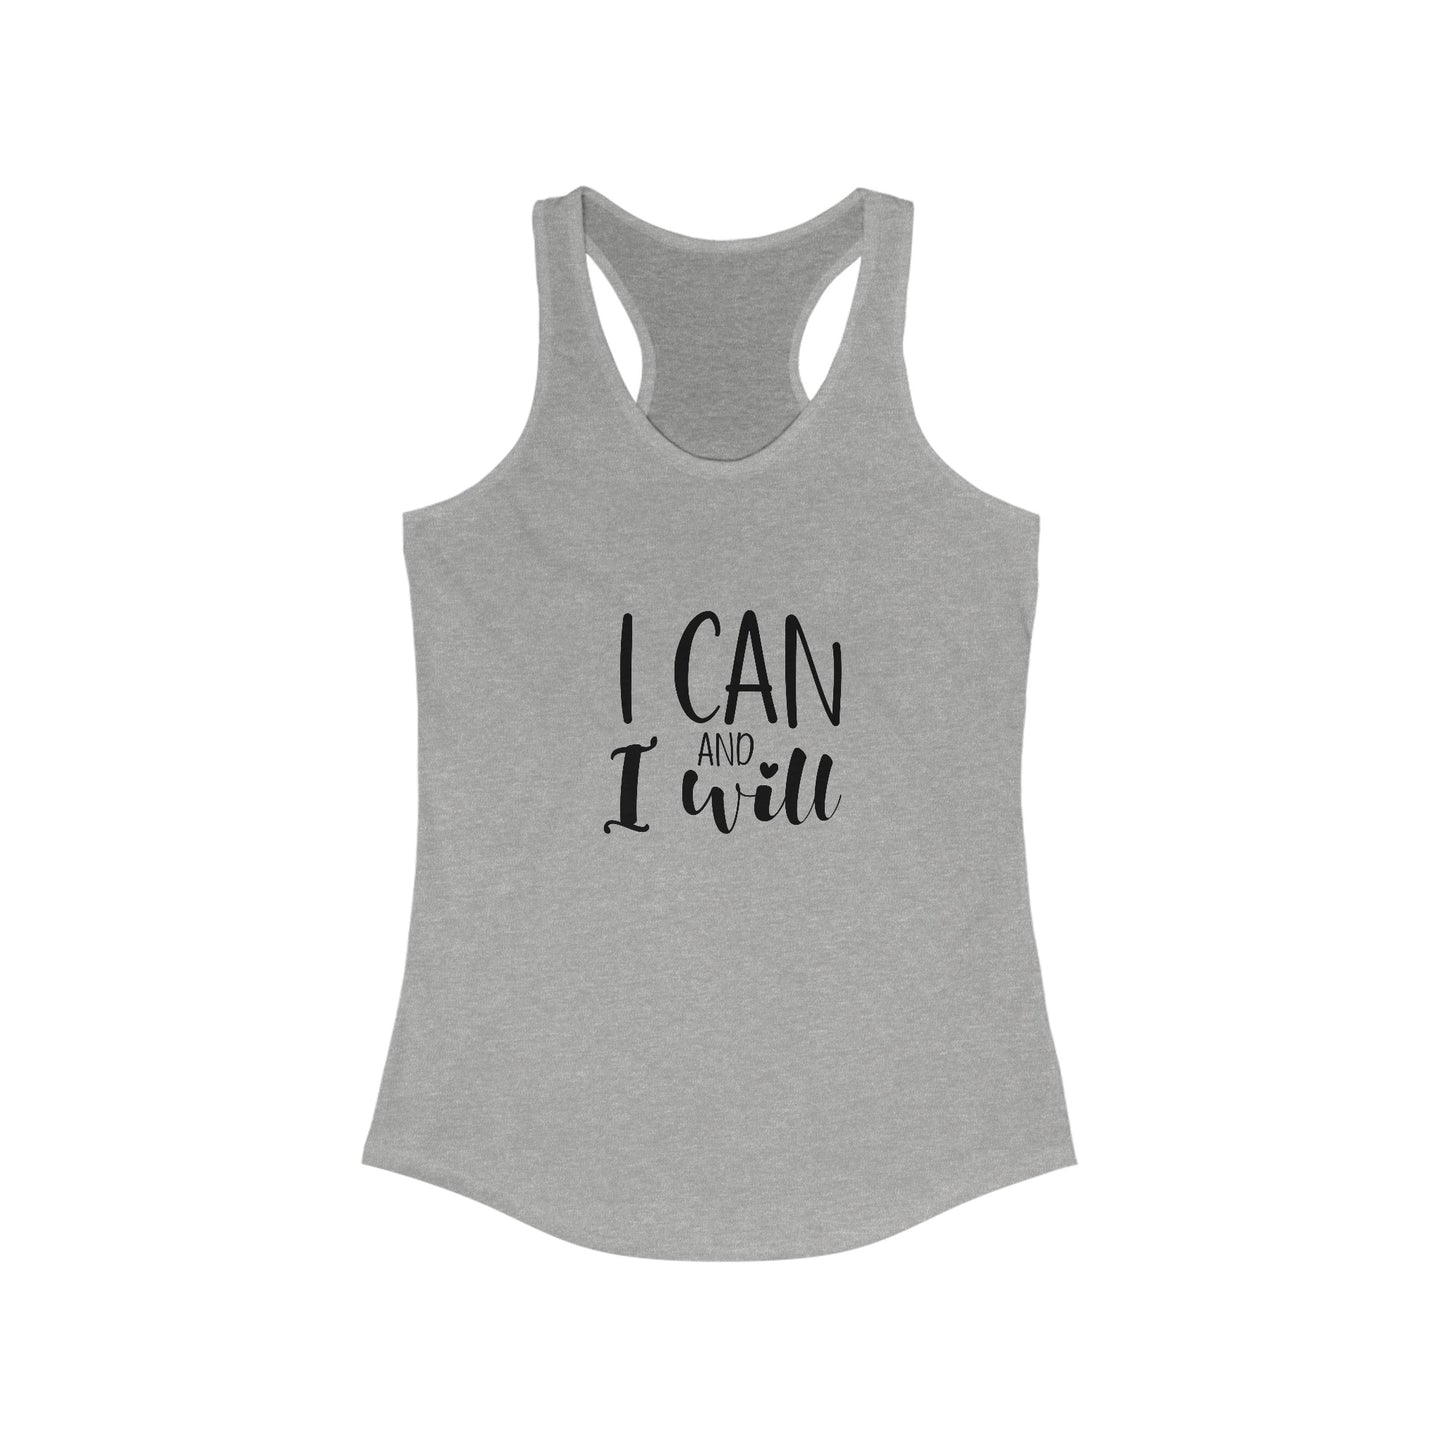 I can and I will Racerback Tank